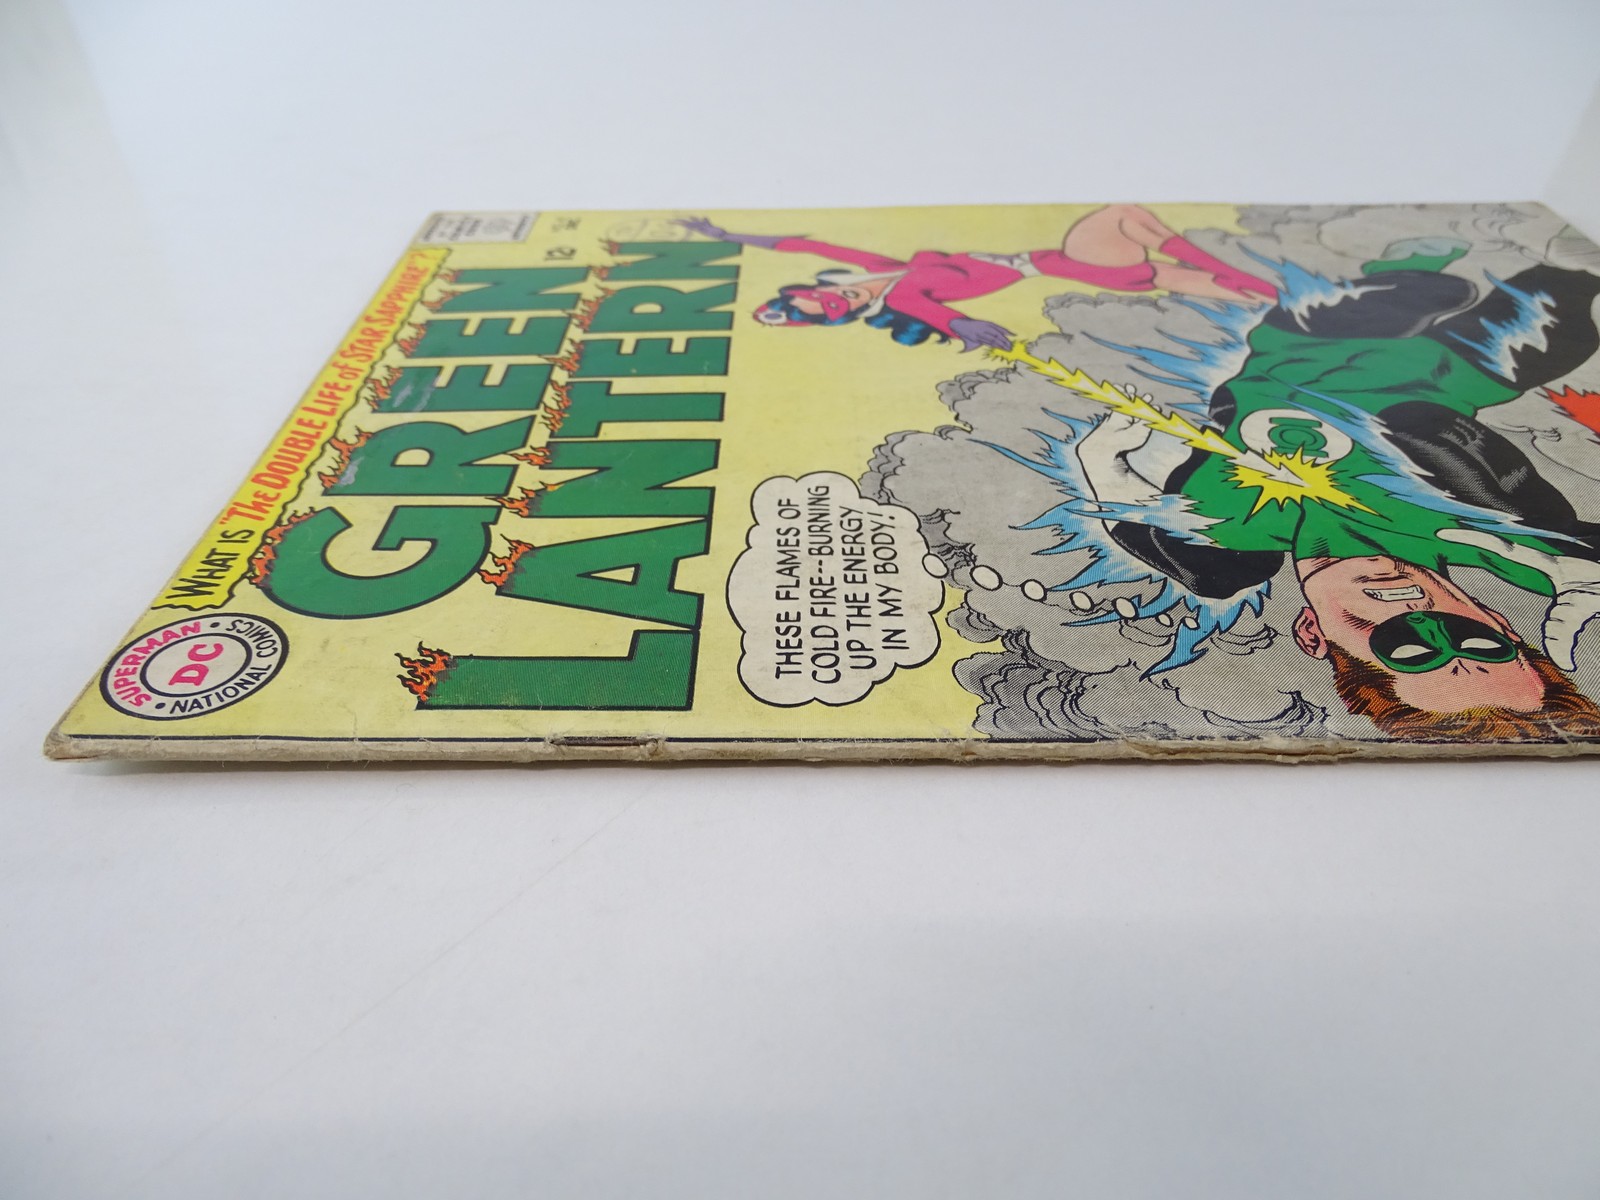 GREEN LANTERN #41 - (1965 - DC - UK Cover Price) - Star Sapphire appearance - Gil Kane cover and - Image 8 of 9